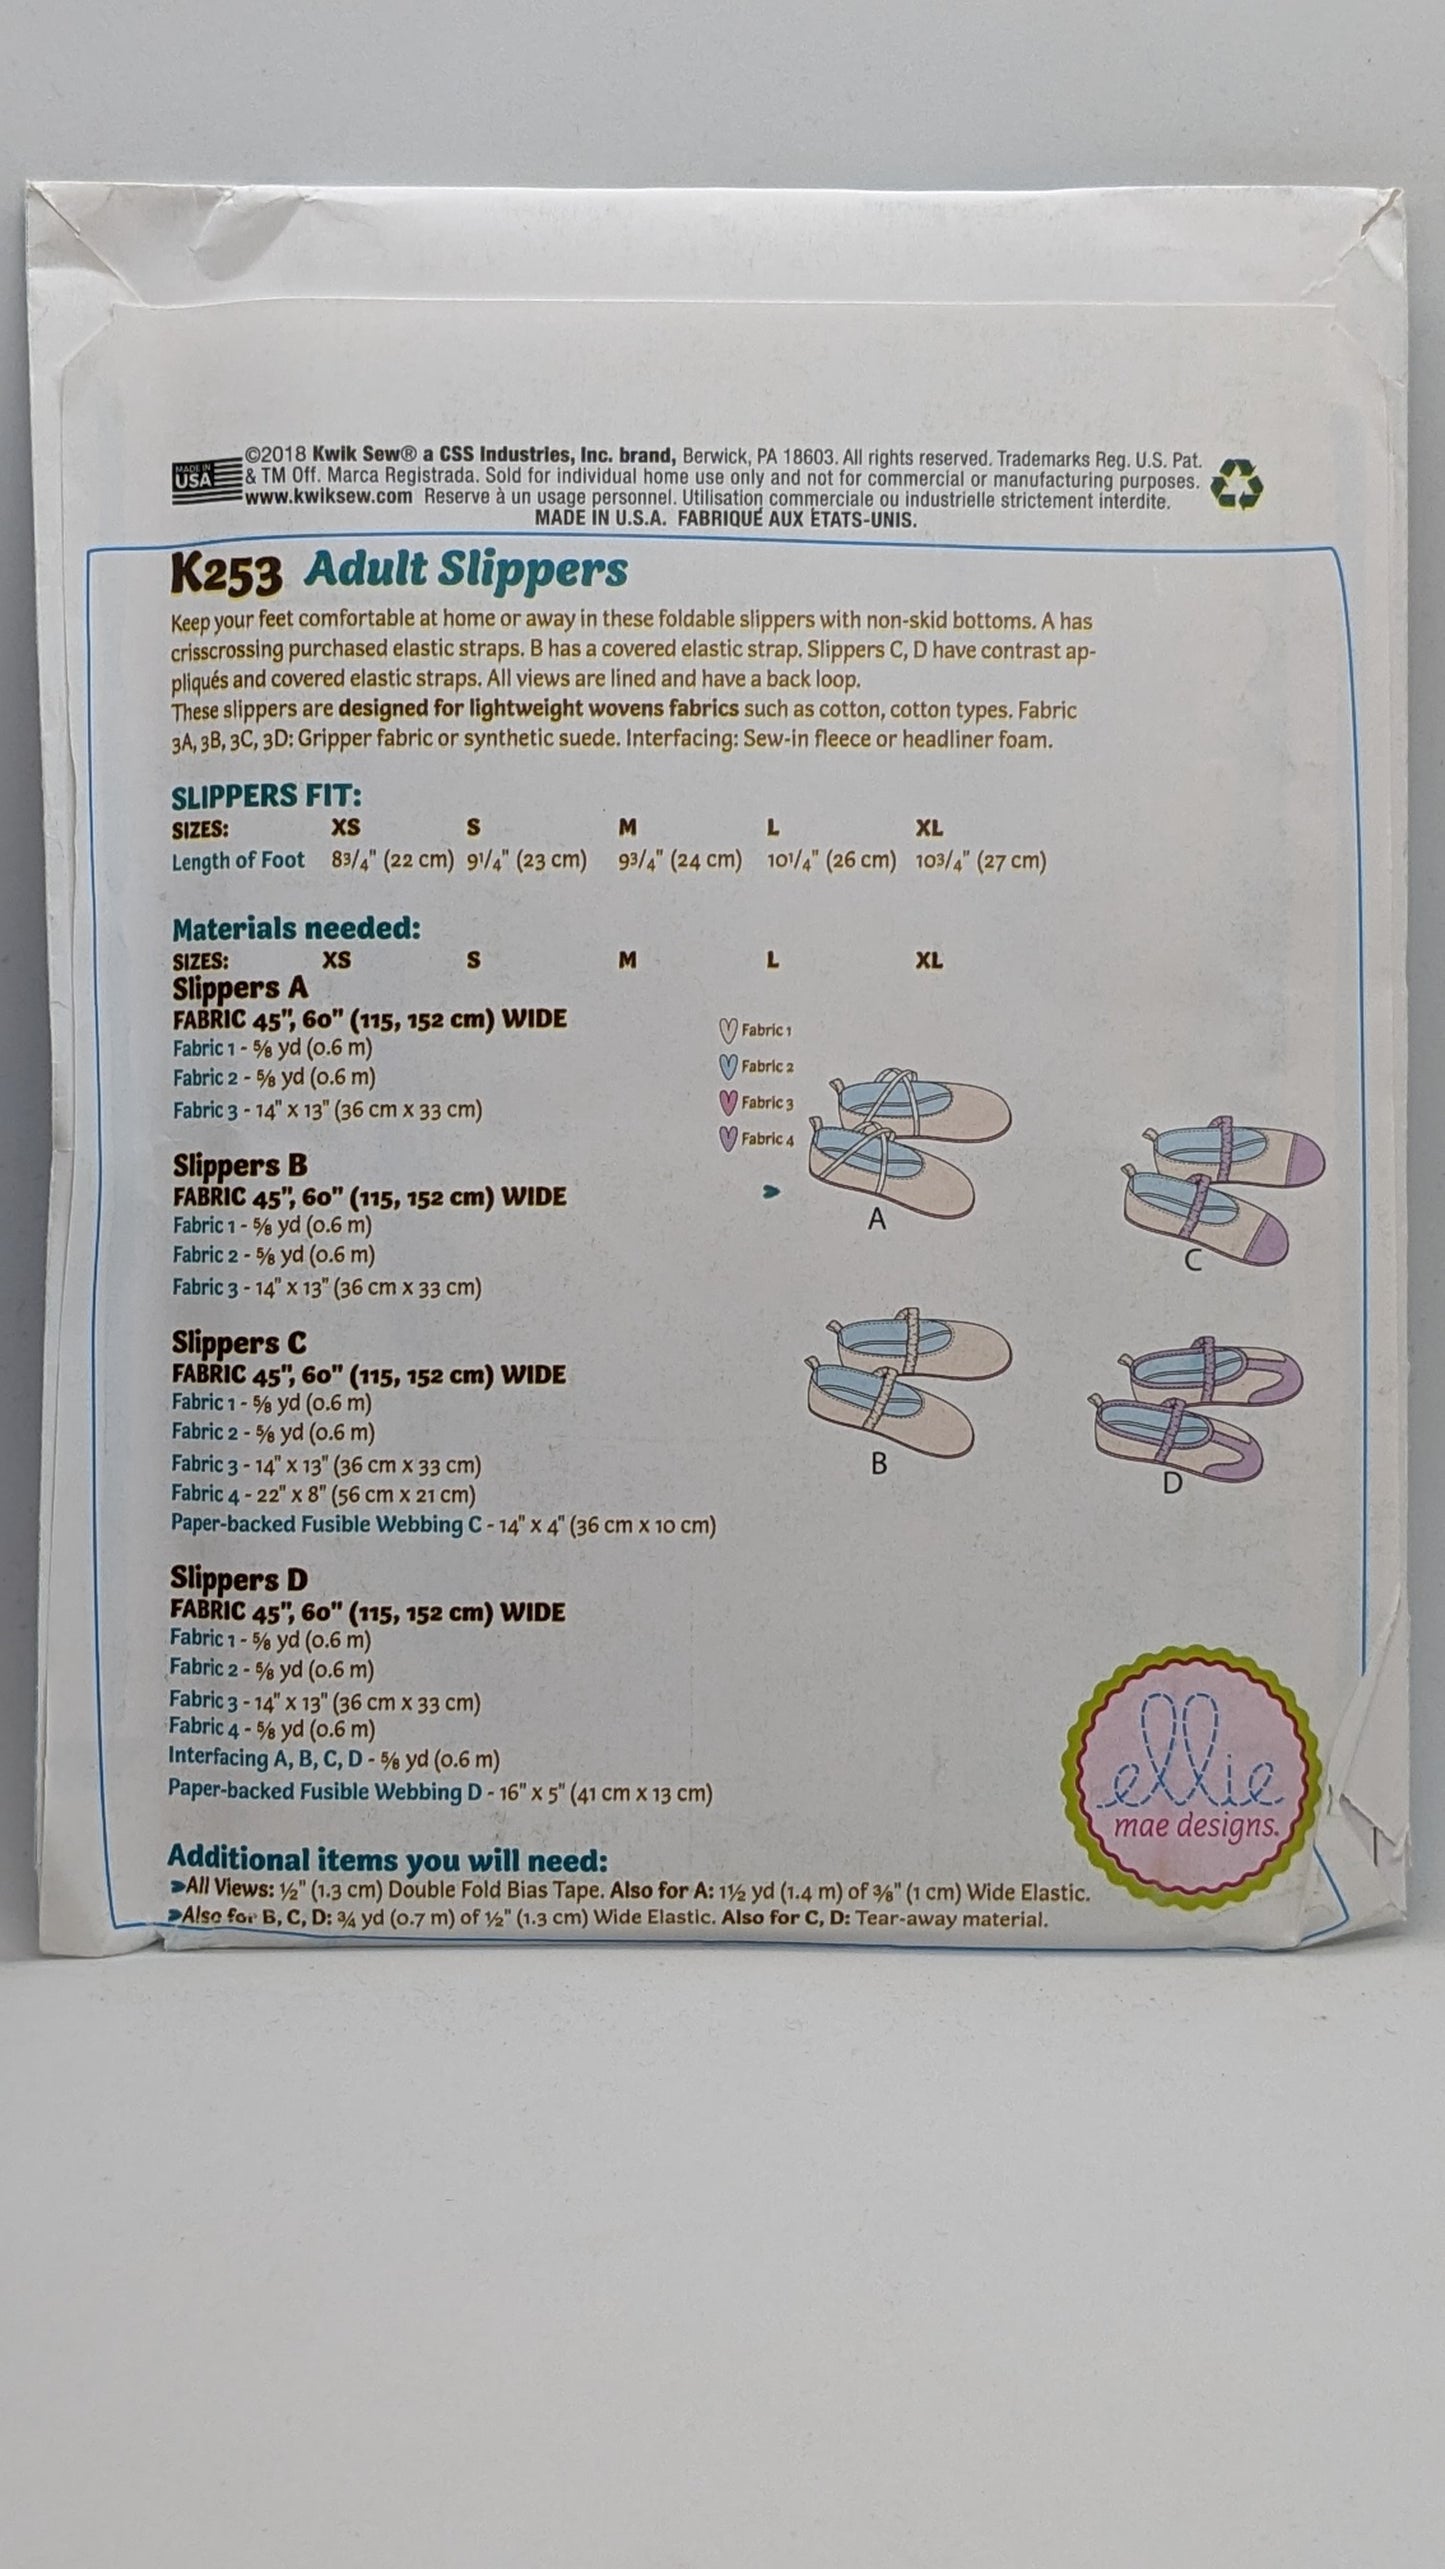 K0253 - Adult Slippers